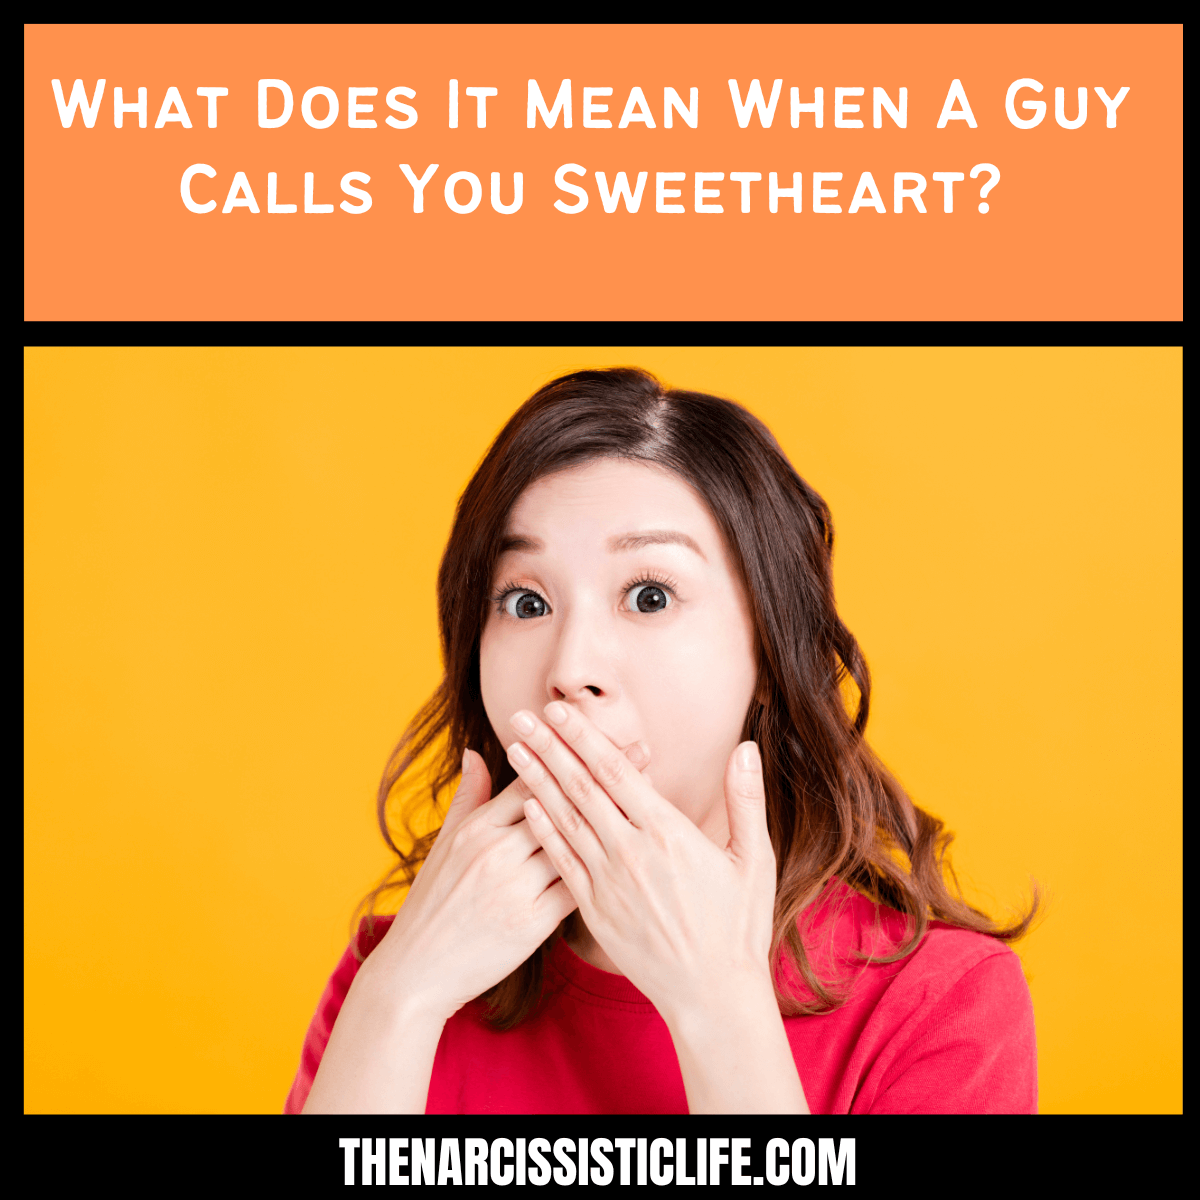 What Does It Mean When A Guy Calls You Sweetheart